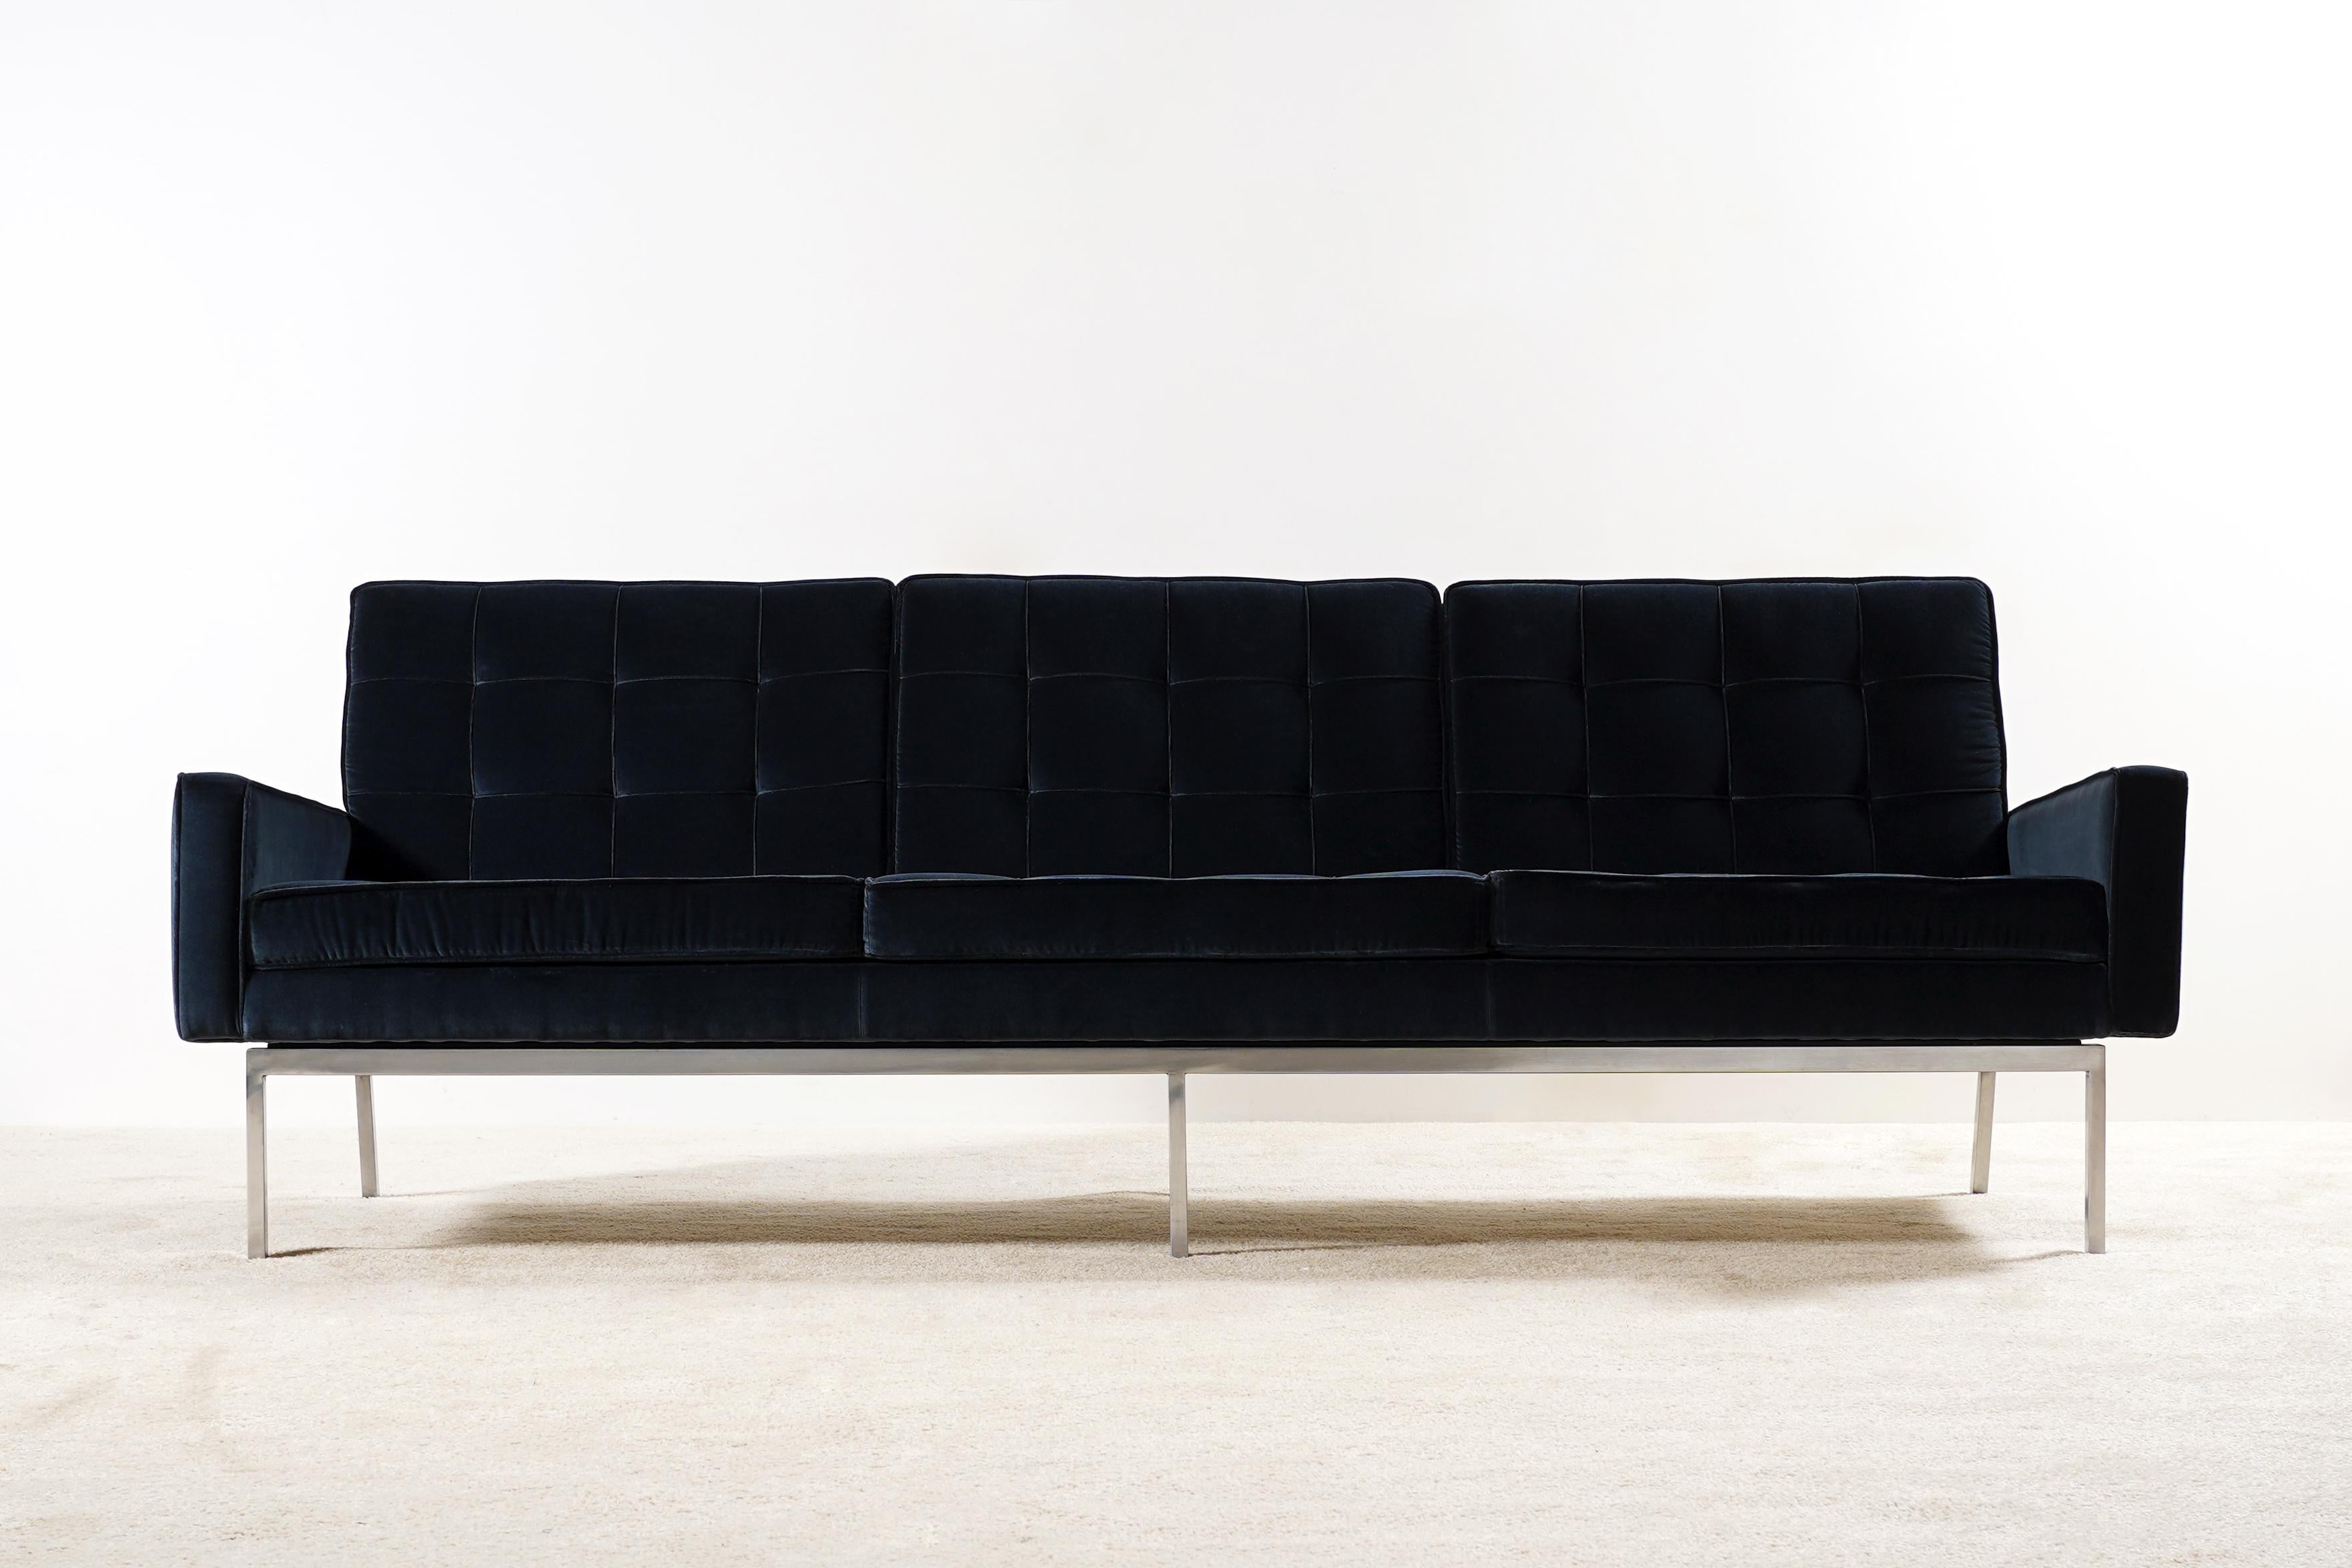 Three seat sofa model 67A designed by Florence Knoll and produced by Knoll International, circa 1960.
This sofa was manufactured only from 1958 to 1973.
Newly re-upholstered with a dark blue velvet from the Kvadrat Raf Simons collection.
Chromed